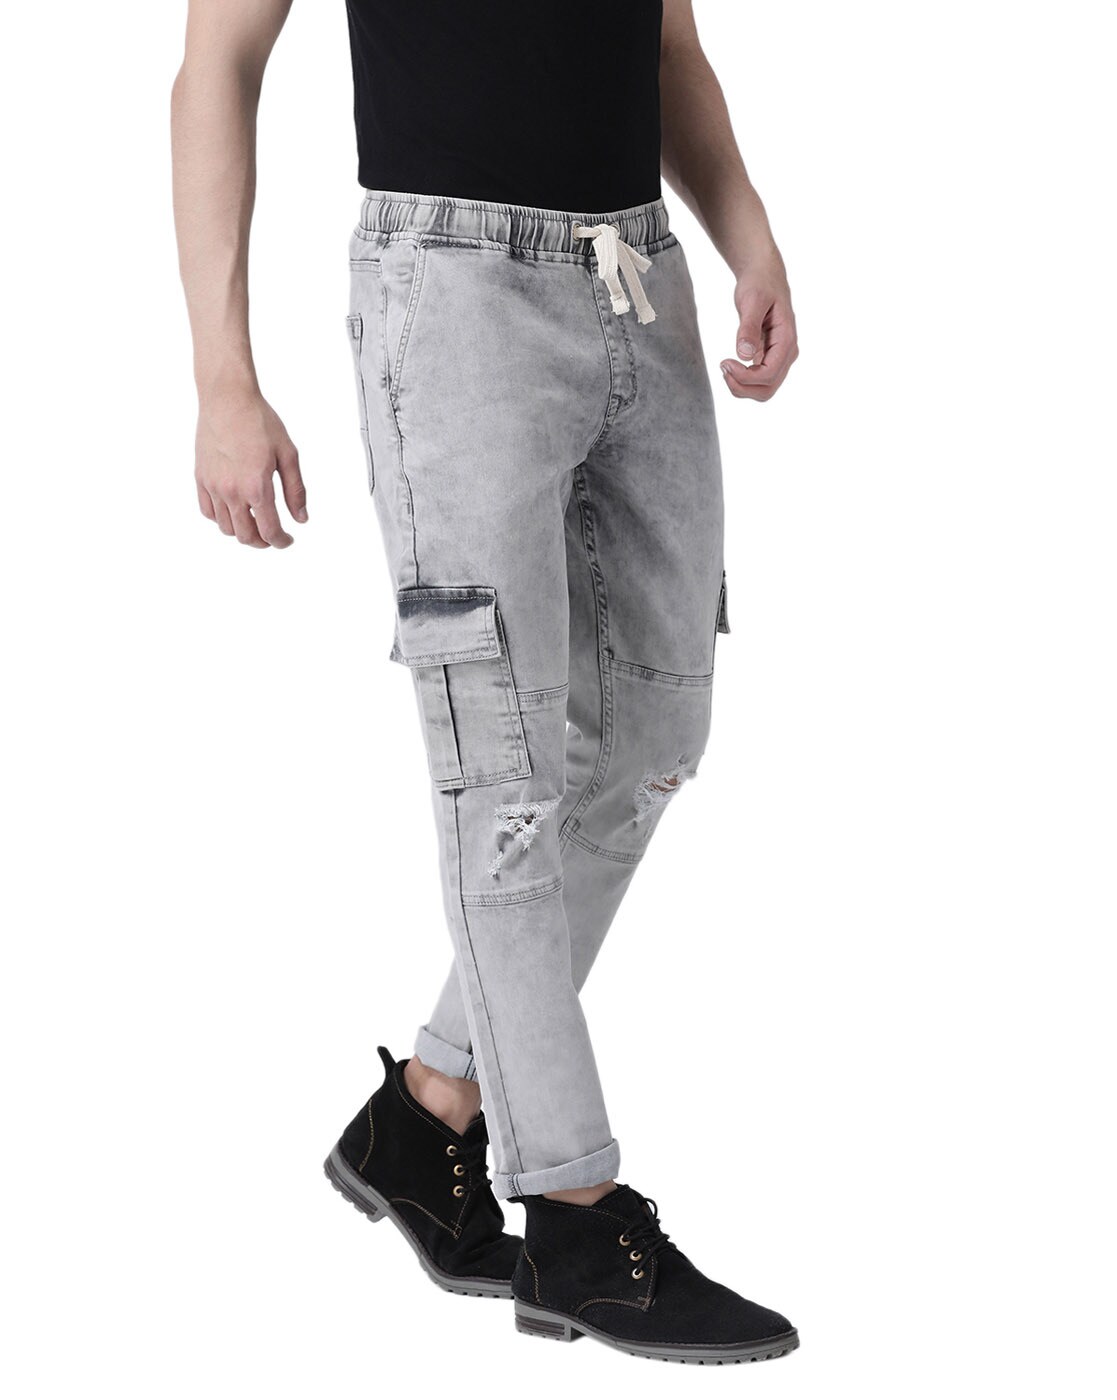 Side Pocket Jeans Trousers - Buy Side Pocket Jeans Trousers online in India-saigonsouth.com.vn